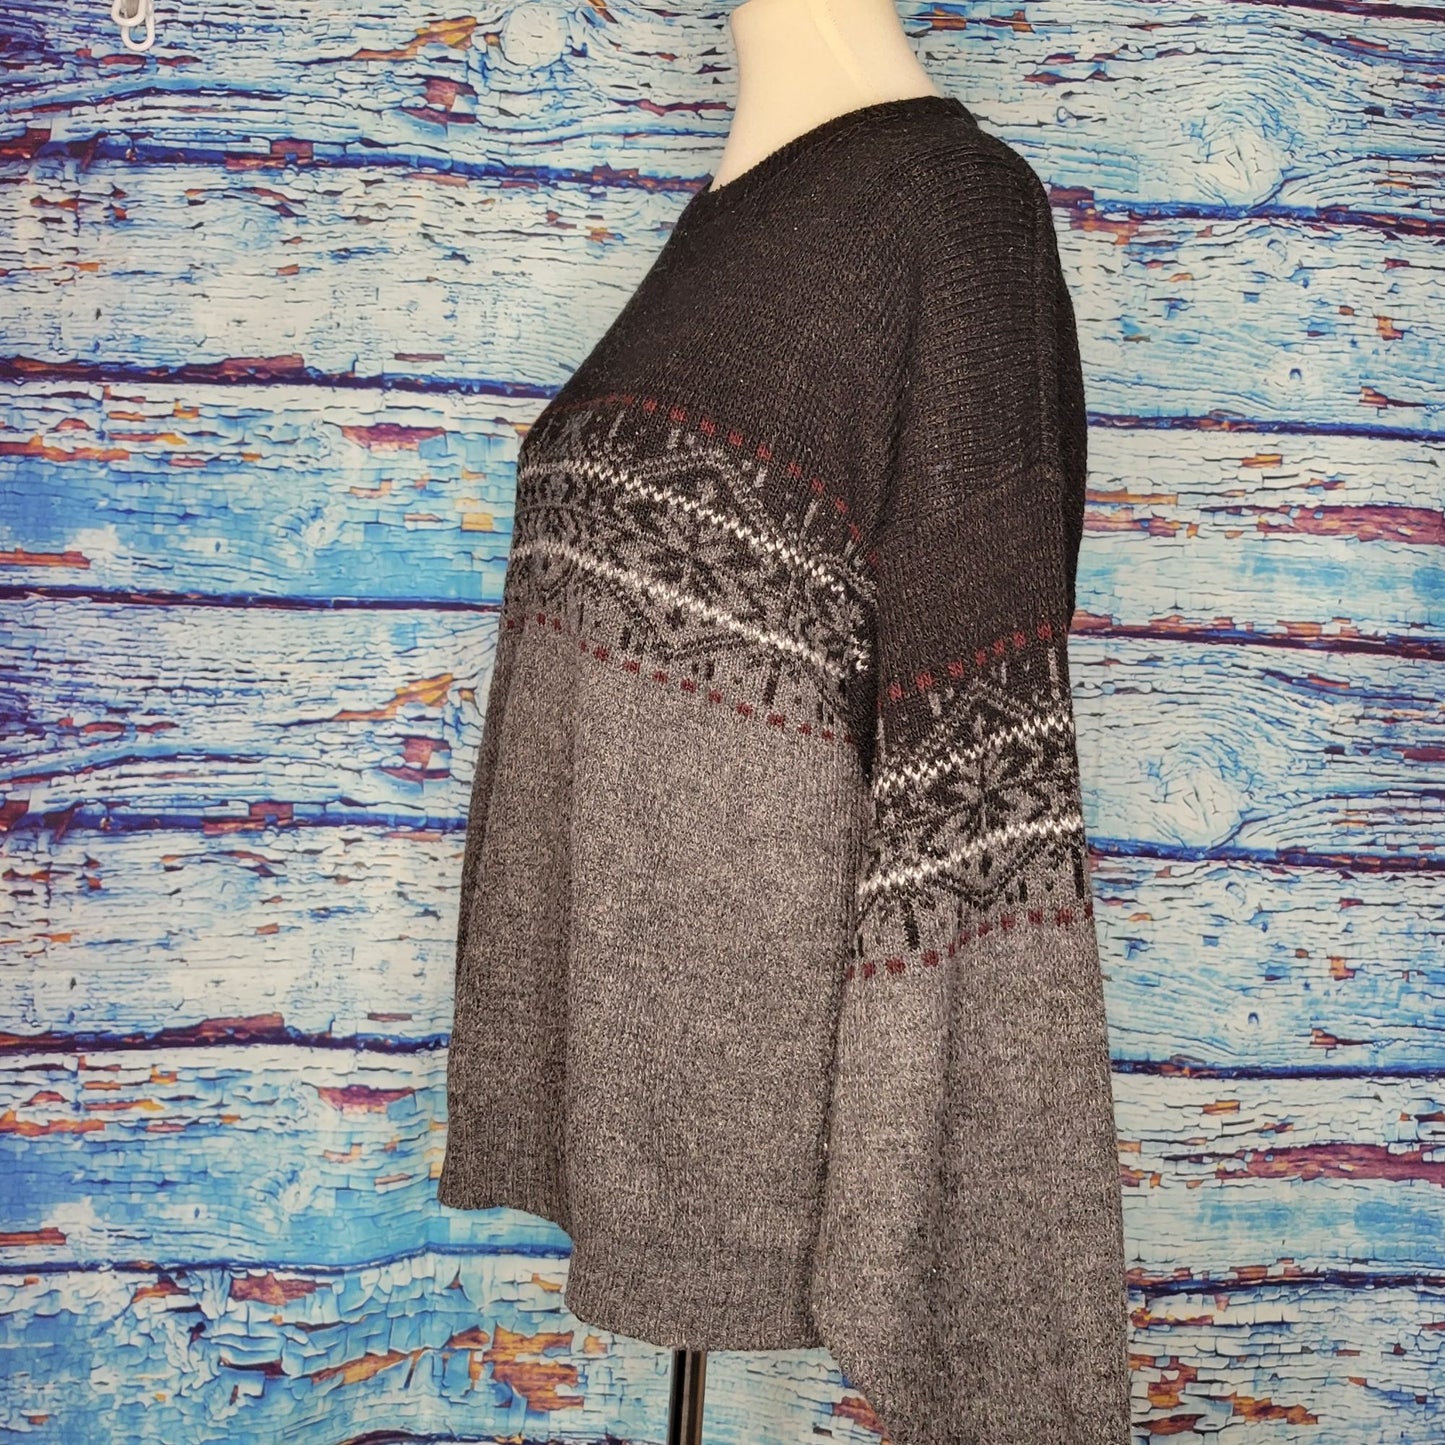 Vintage Men's 80's 90's Old Man Sweater by Scandia